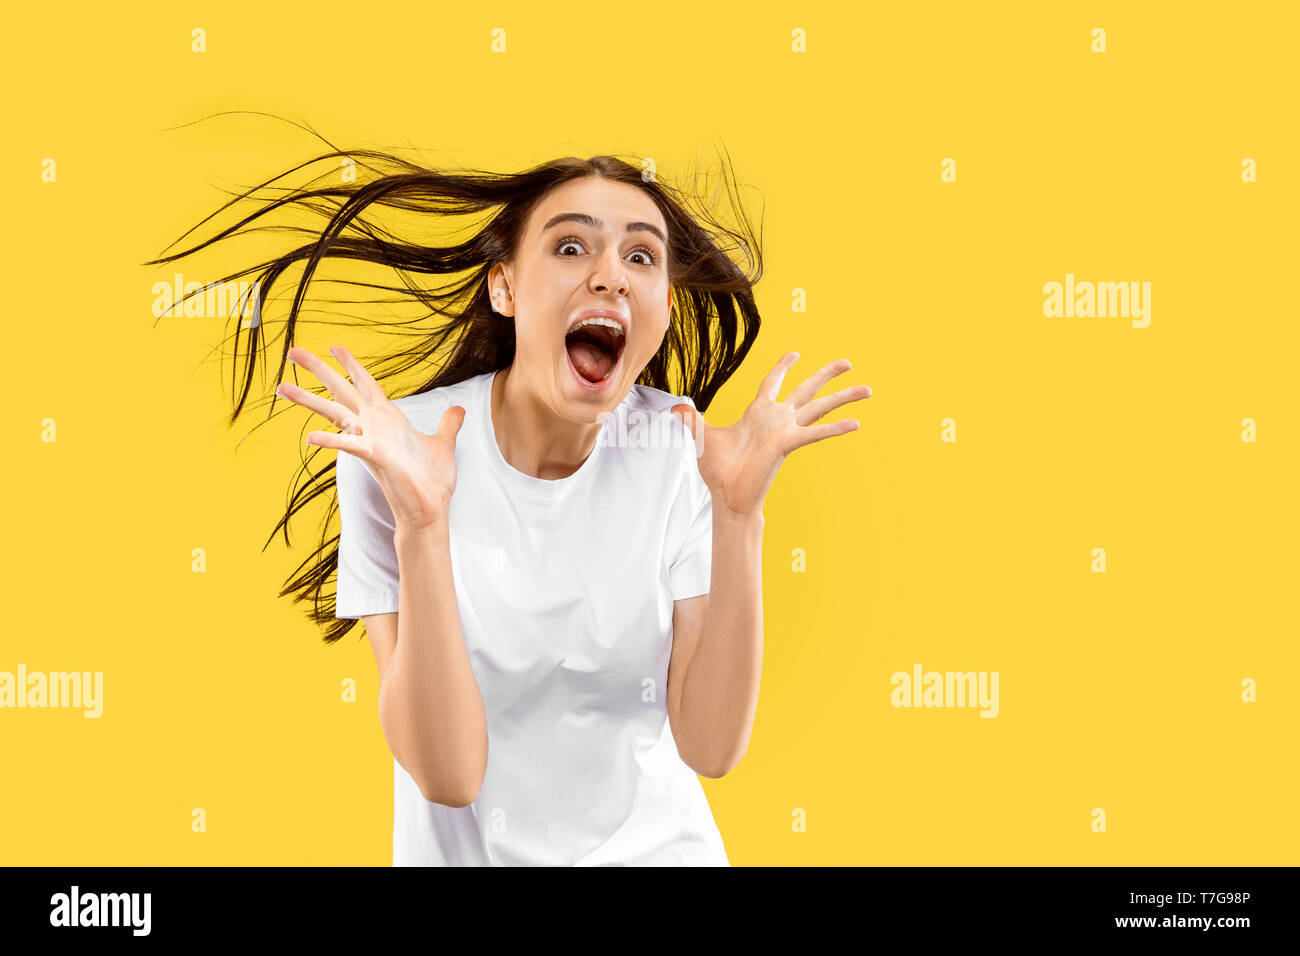 Brilliant news and sea of happieness. Beautiful female half-length portrait isolated on yellow studio background. Young smiling woman. Negative space. Facial expression, human emotions concept. Stock Photo